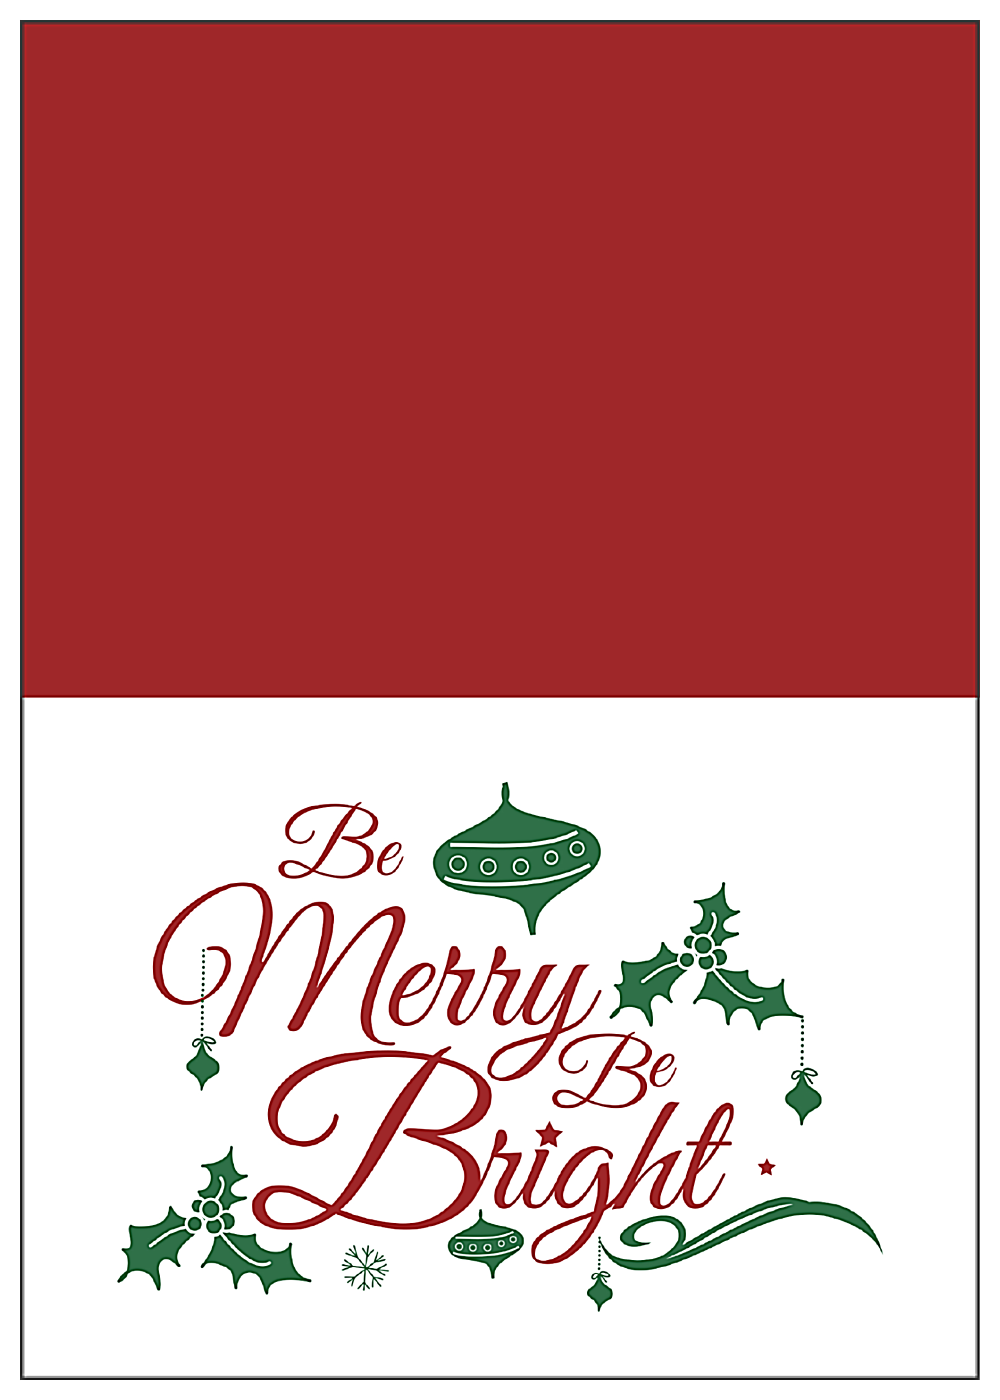 Merry Bright front - Greeting Cards Maker